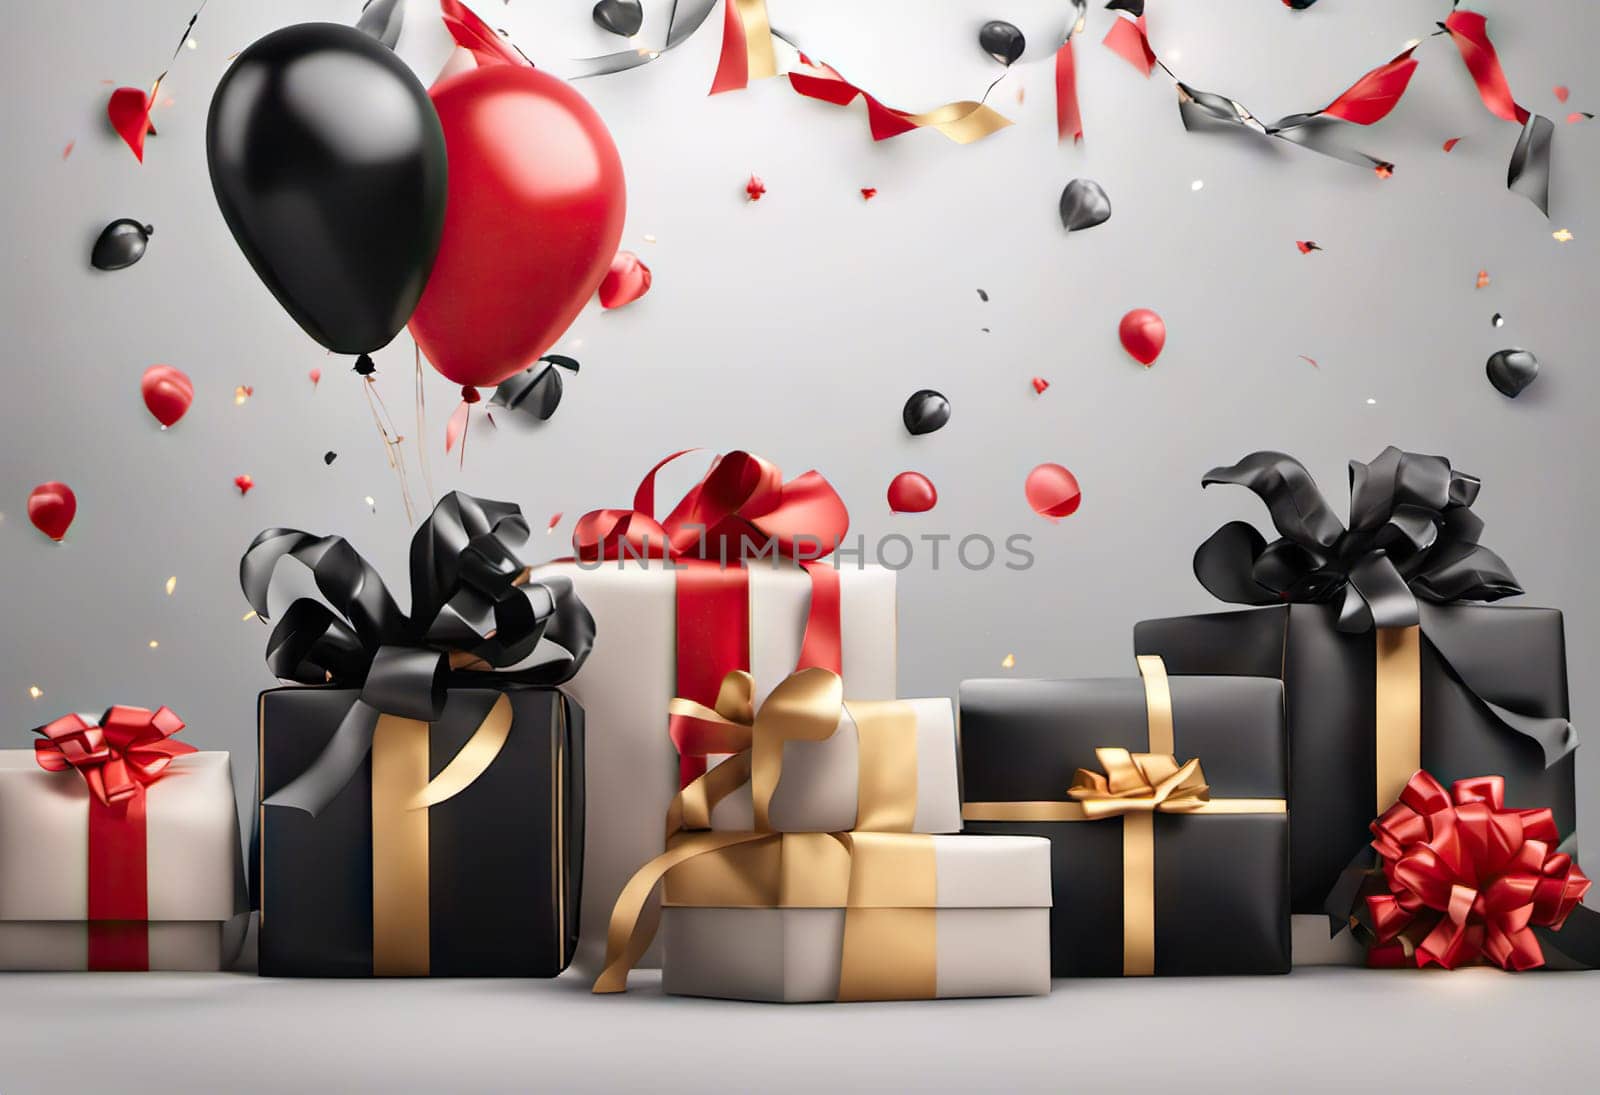 present box and balloons on background. suitable for any holiday. Black Friday sales and discounts by EkaterinaPereslavtseva